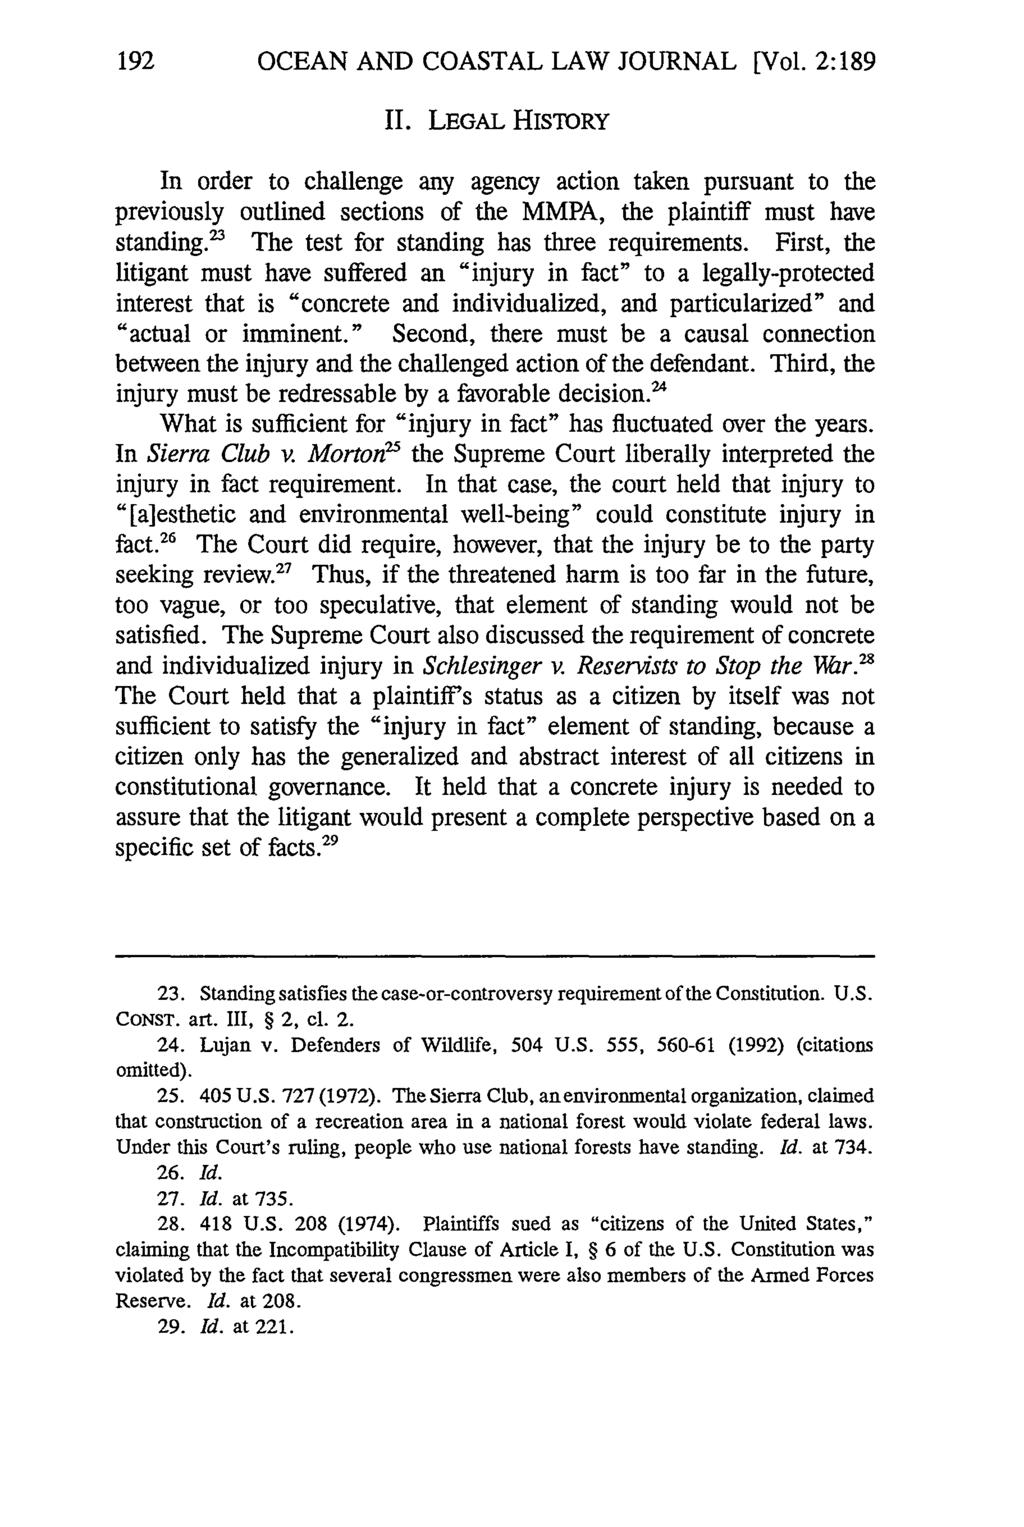 192 OCEAN AND COASTAL LAW JOURNAL [Vol. 2:189 I. LEGAL HISTORY In order to challenge any agency action taken pursuant to the previously outlined sections of the MMPA, the plaintiff must have standing.